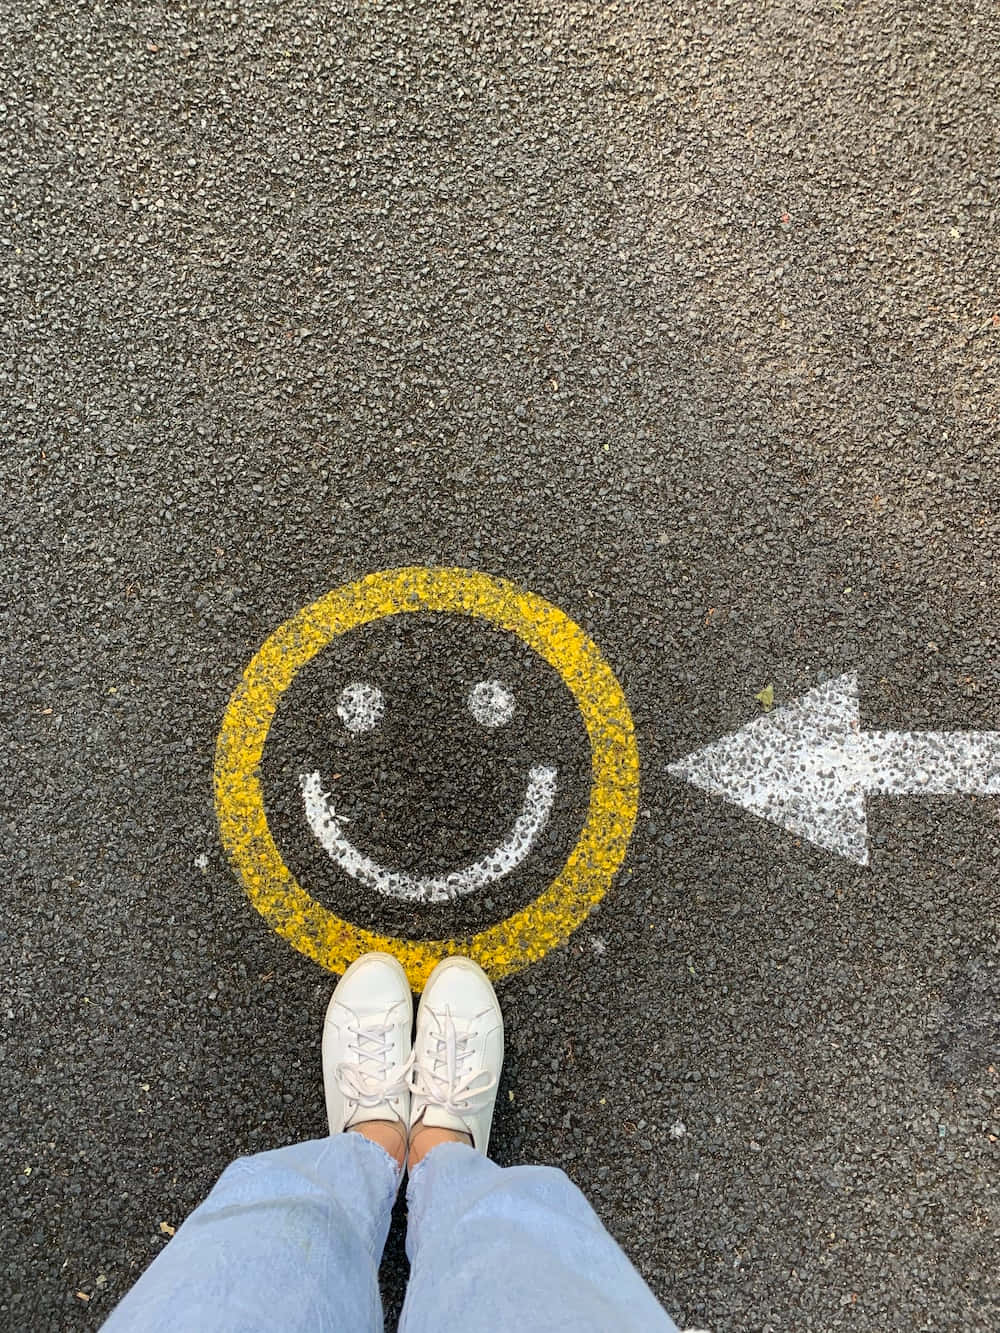 A Person Standing On A Road With A Smiley Face Drawn On It